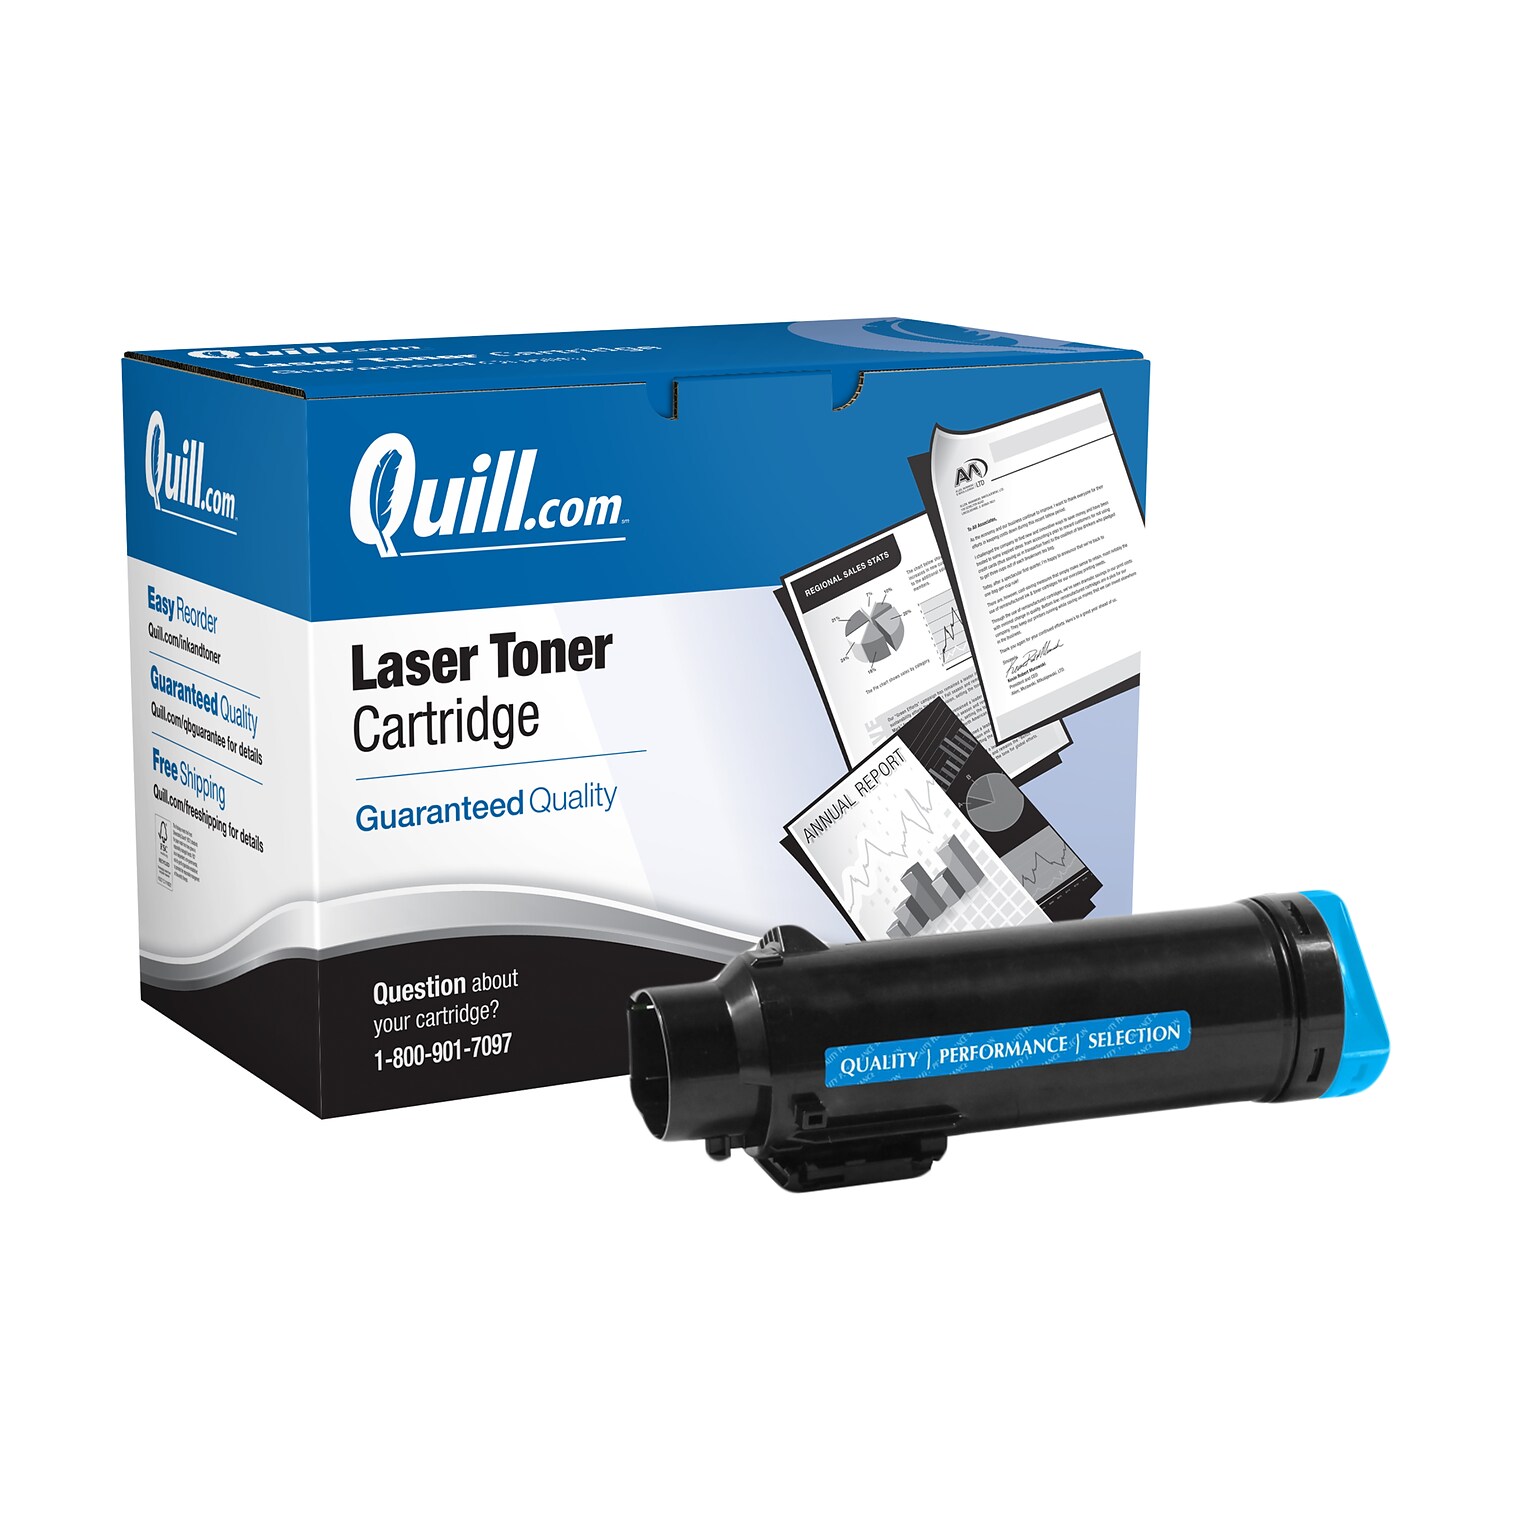 Quill Brand® Remanufactured Cyan Extra High Yield Toner Cartridge Replacement for Xerox 6510 (106R03690) (Lifetime Warranty)